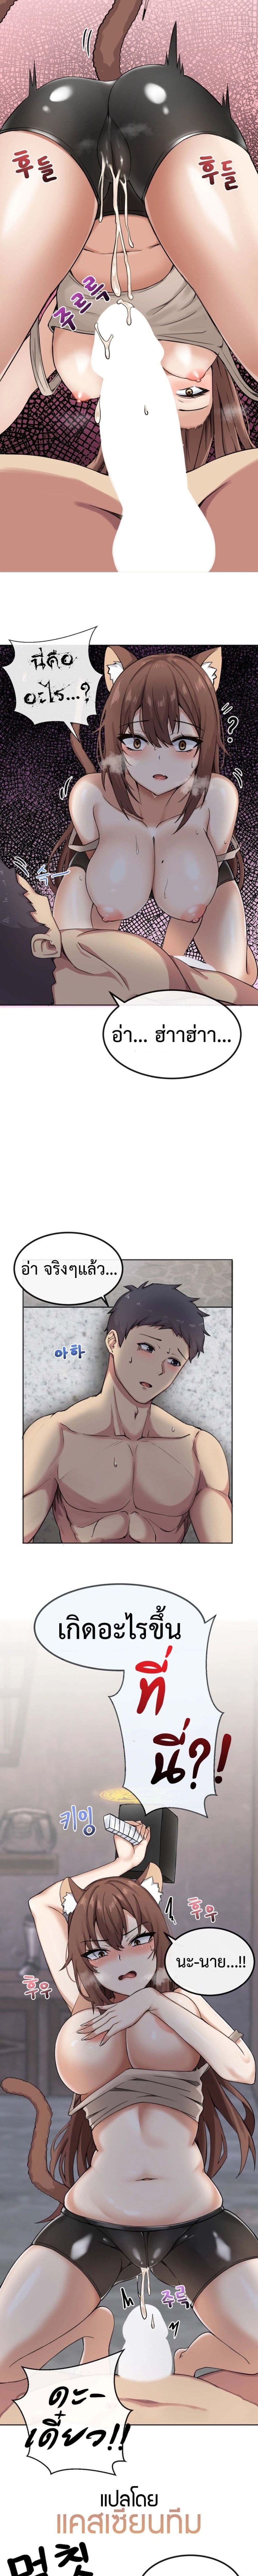 Meat Doll Workshop in Another World ตอนที่ 2 ภาพ 7